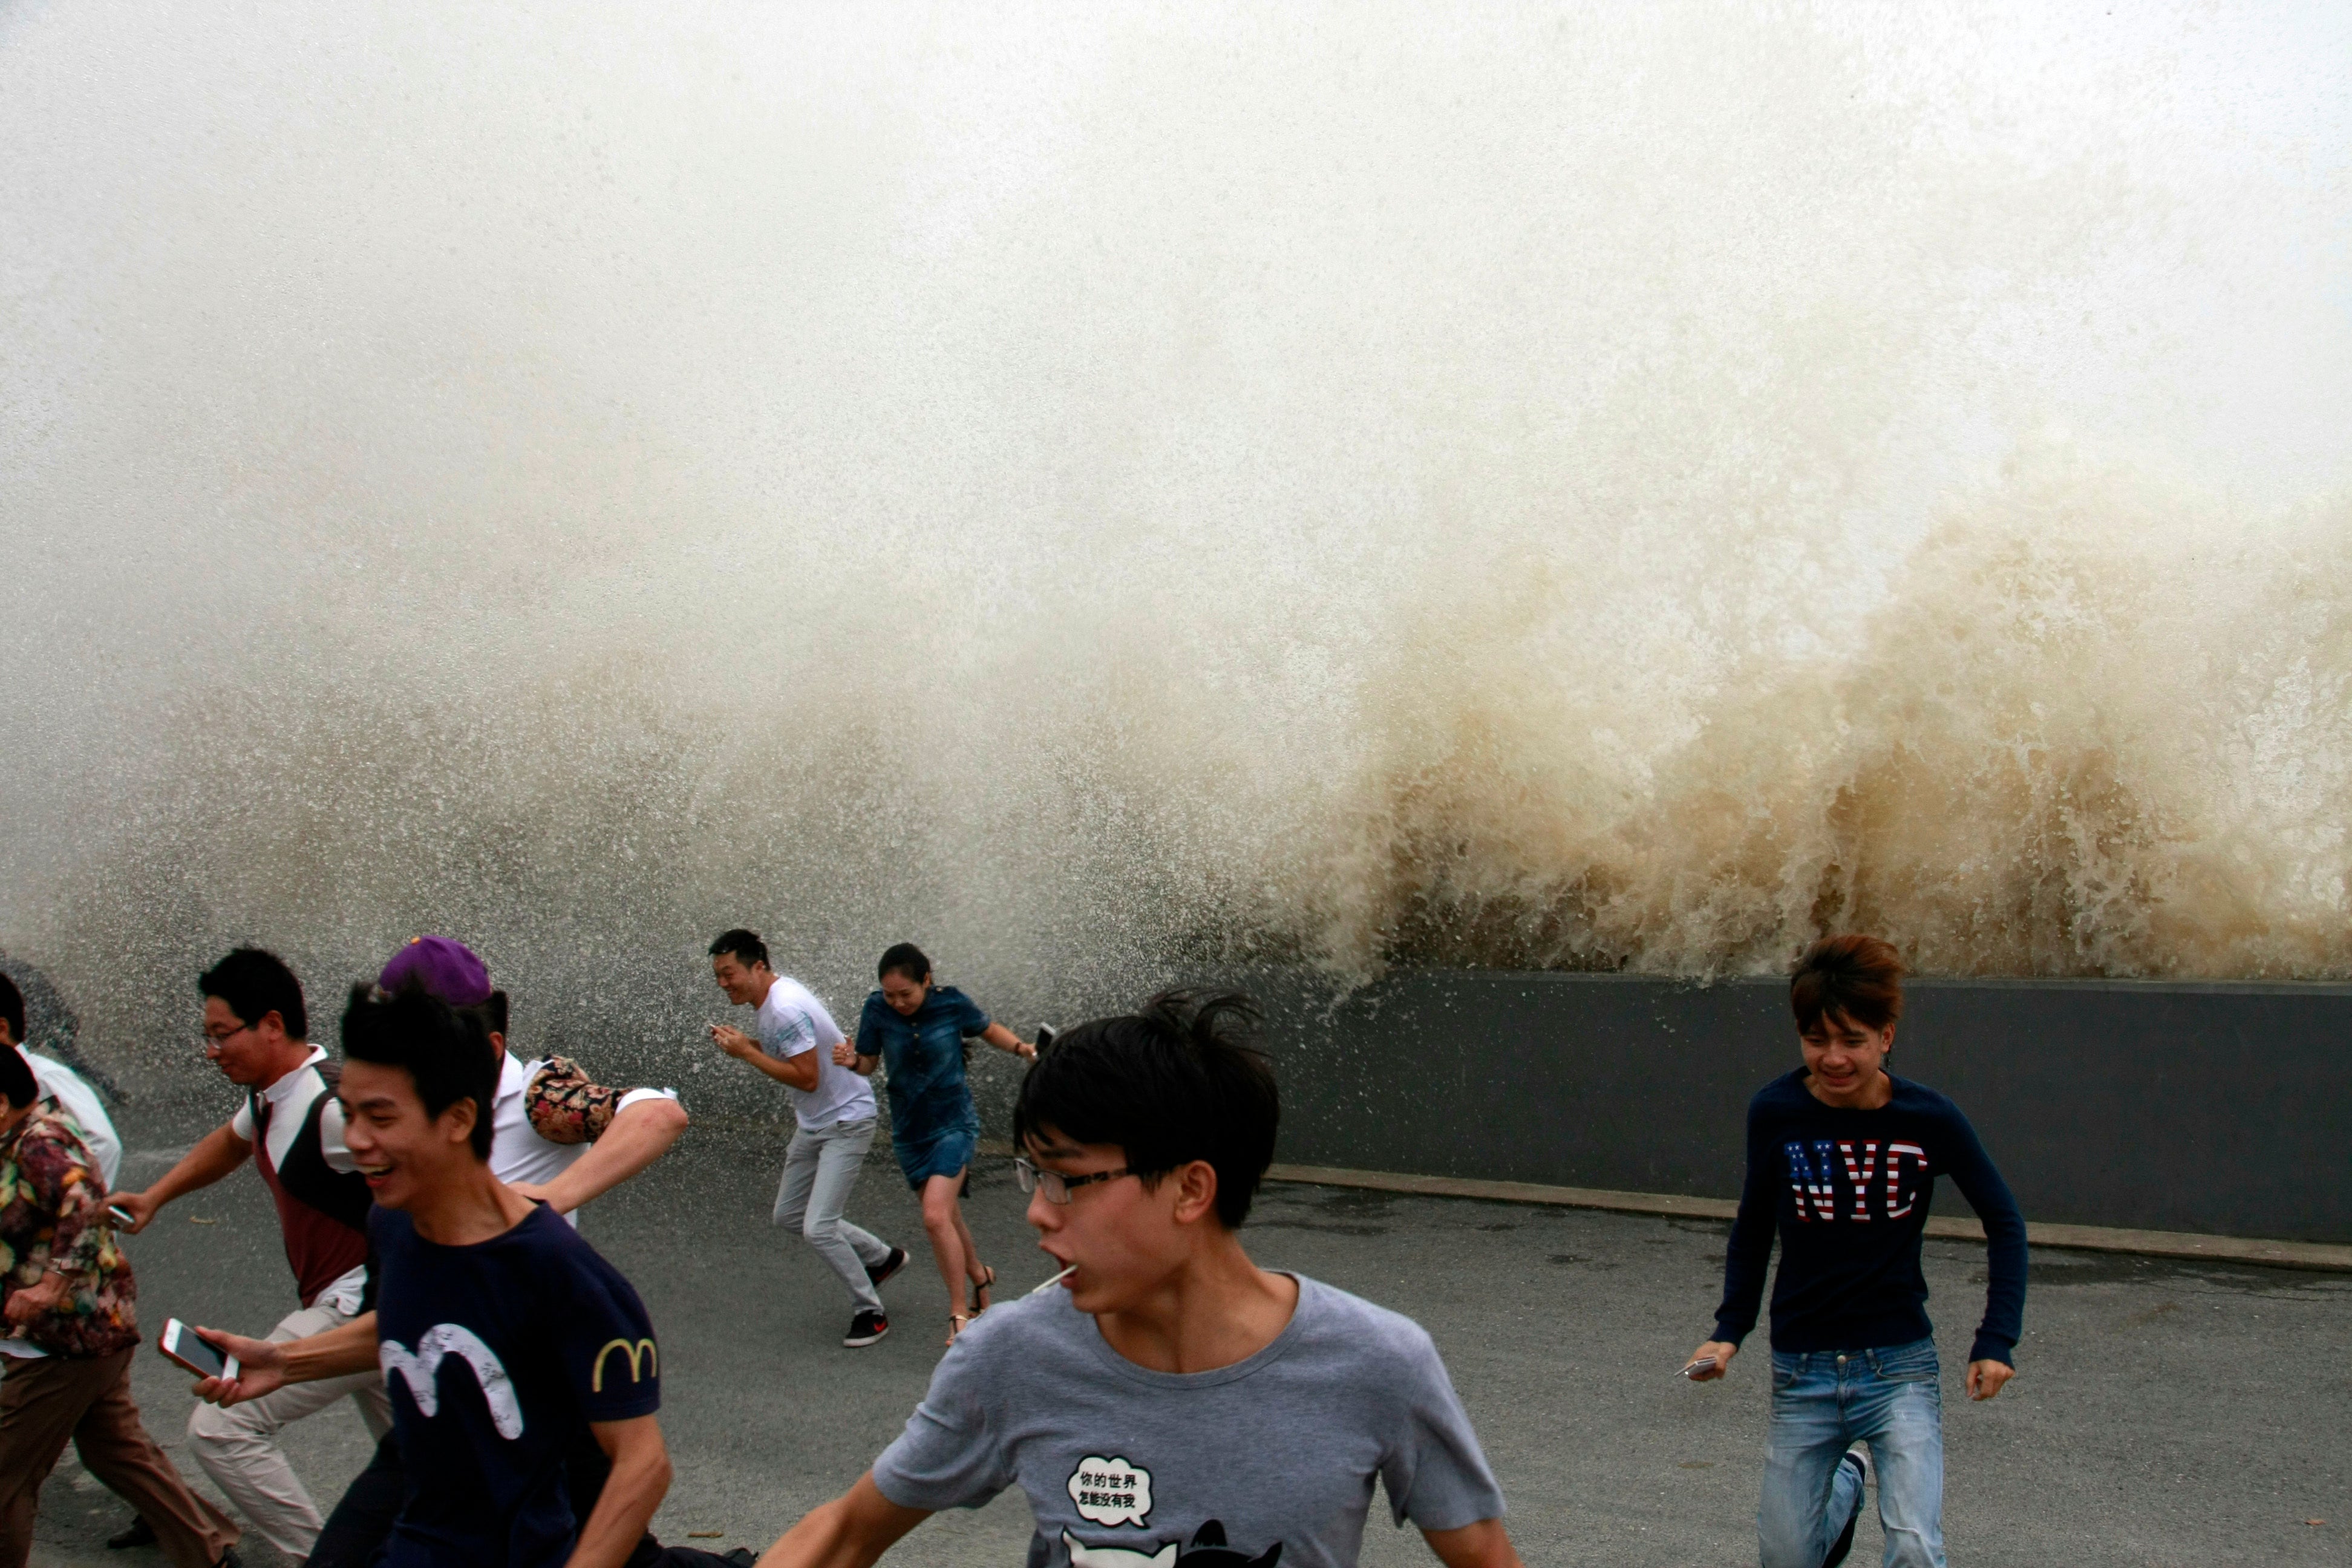 Spectators run from the wall of water in Zhejiang province